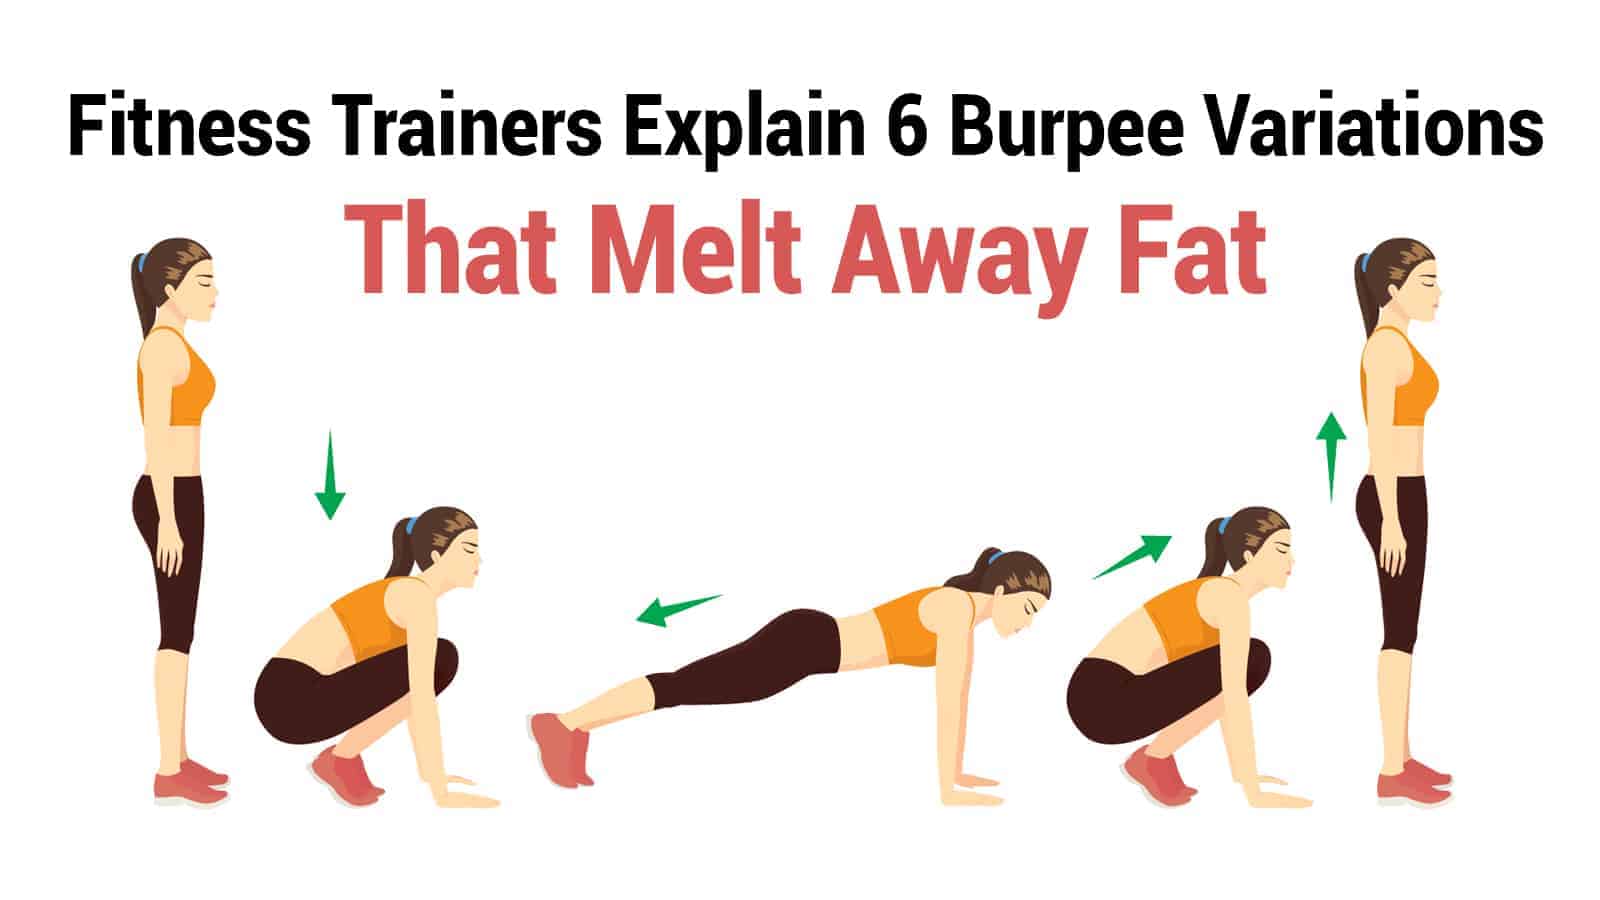 Fitness Trainers Explain 6 Burpee Variations That Melt Away Fat